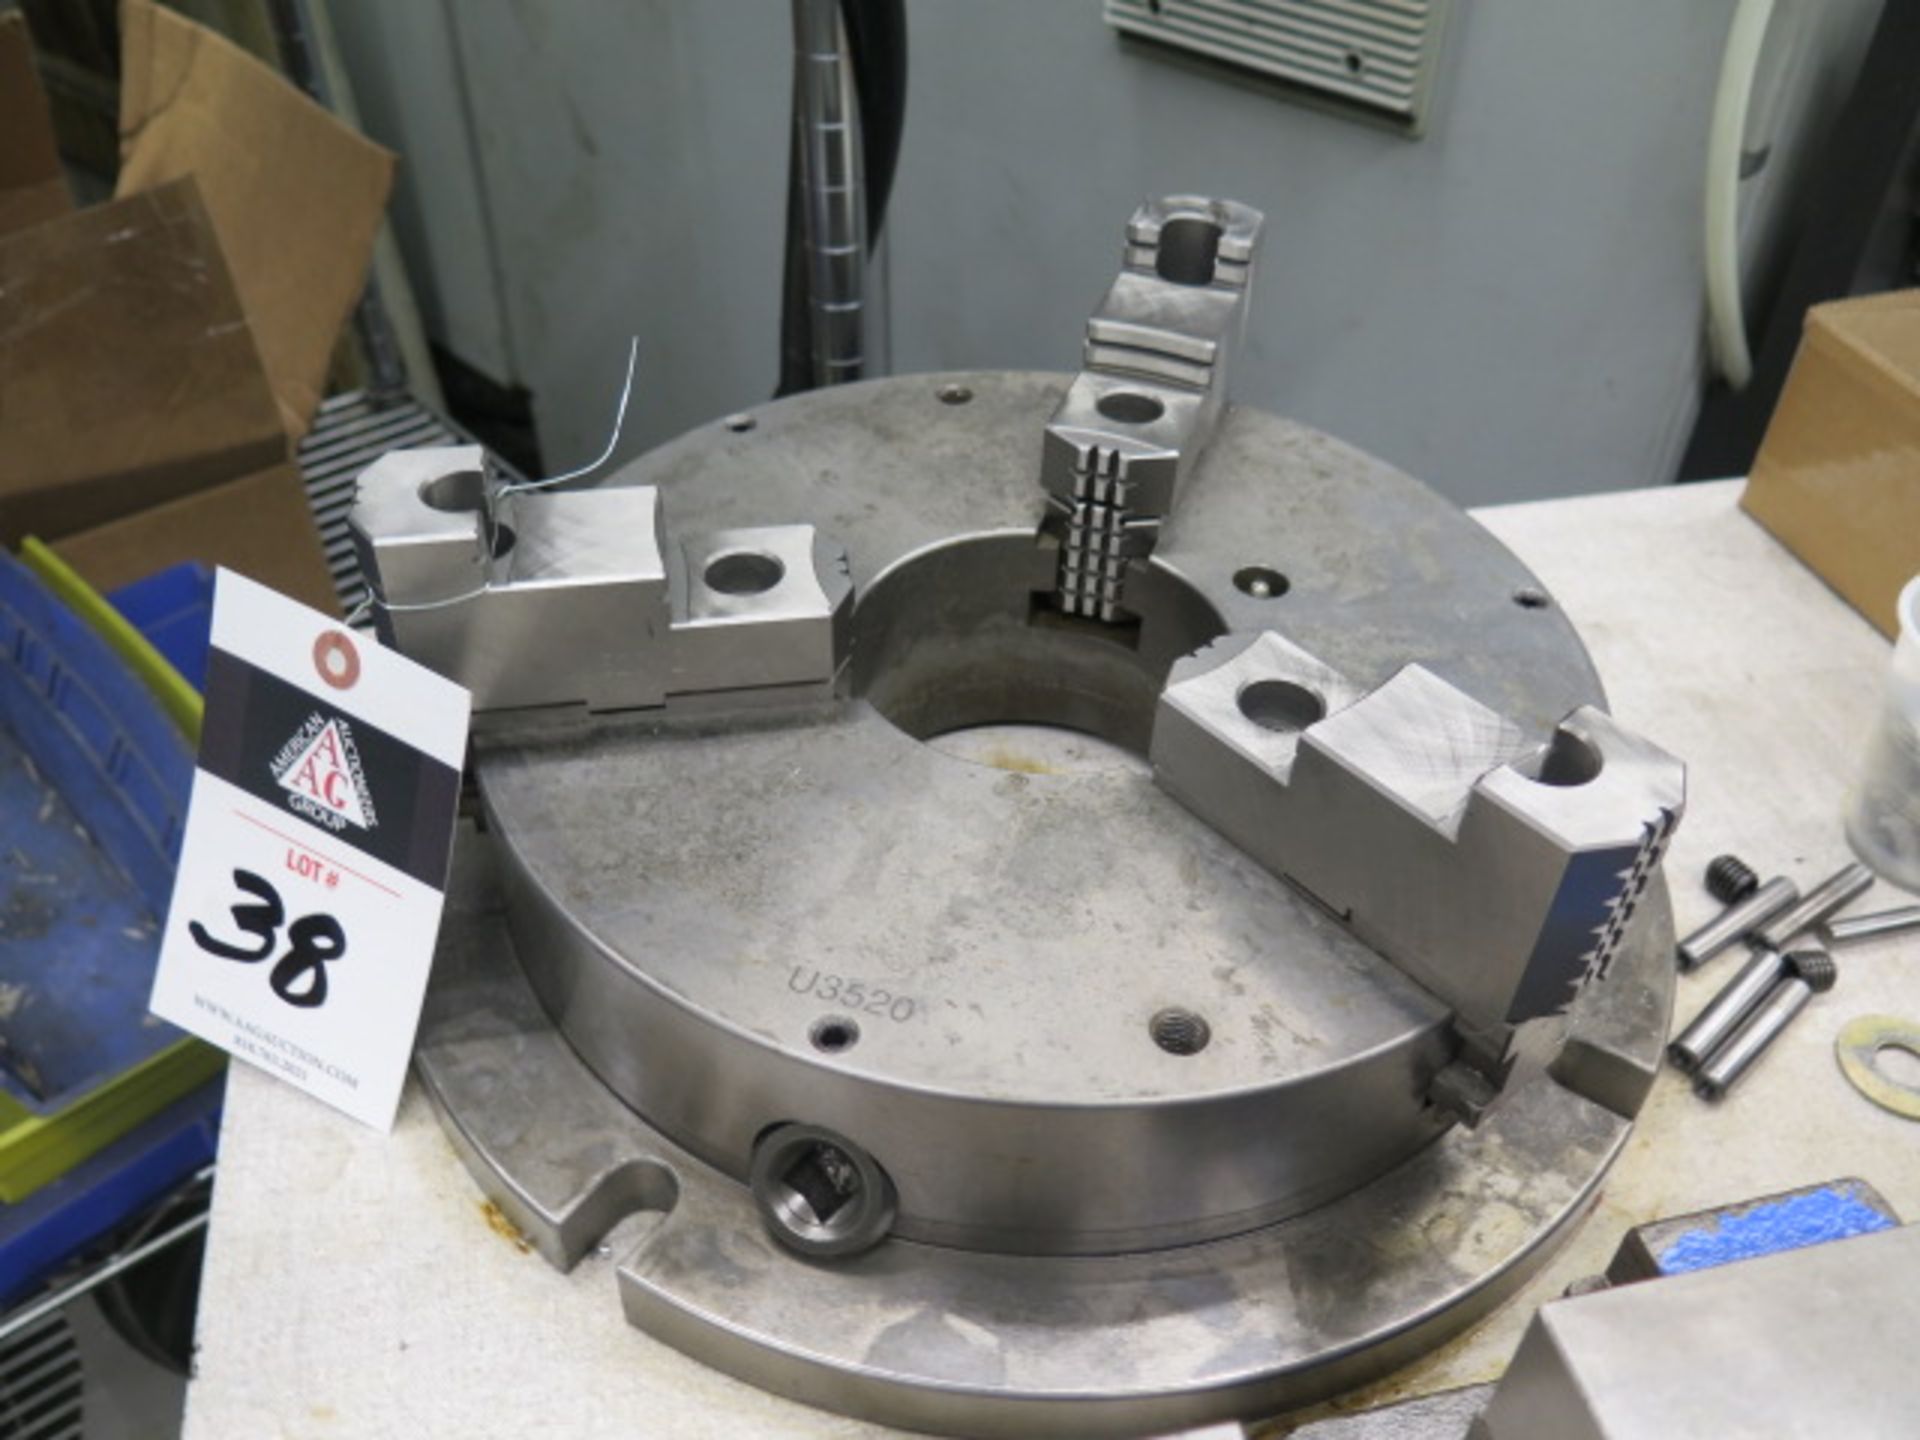 NBK-12 12" 3-Jaw Chuck w/ Rotary Head / Mill Table Mounting Base (SOLD AS-IS - NO WARRANTY)